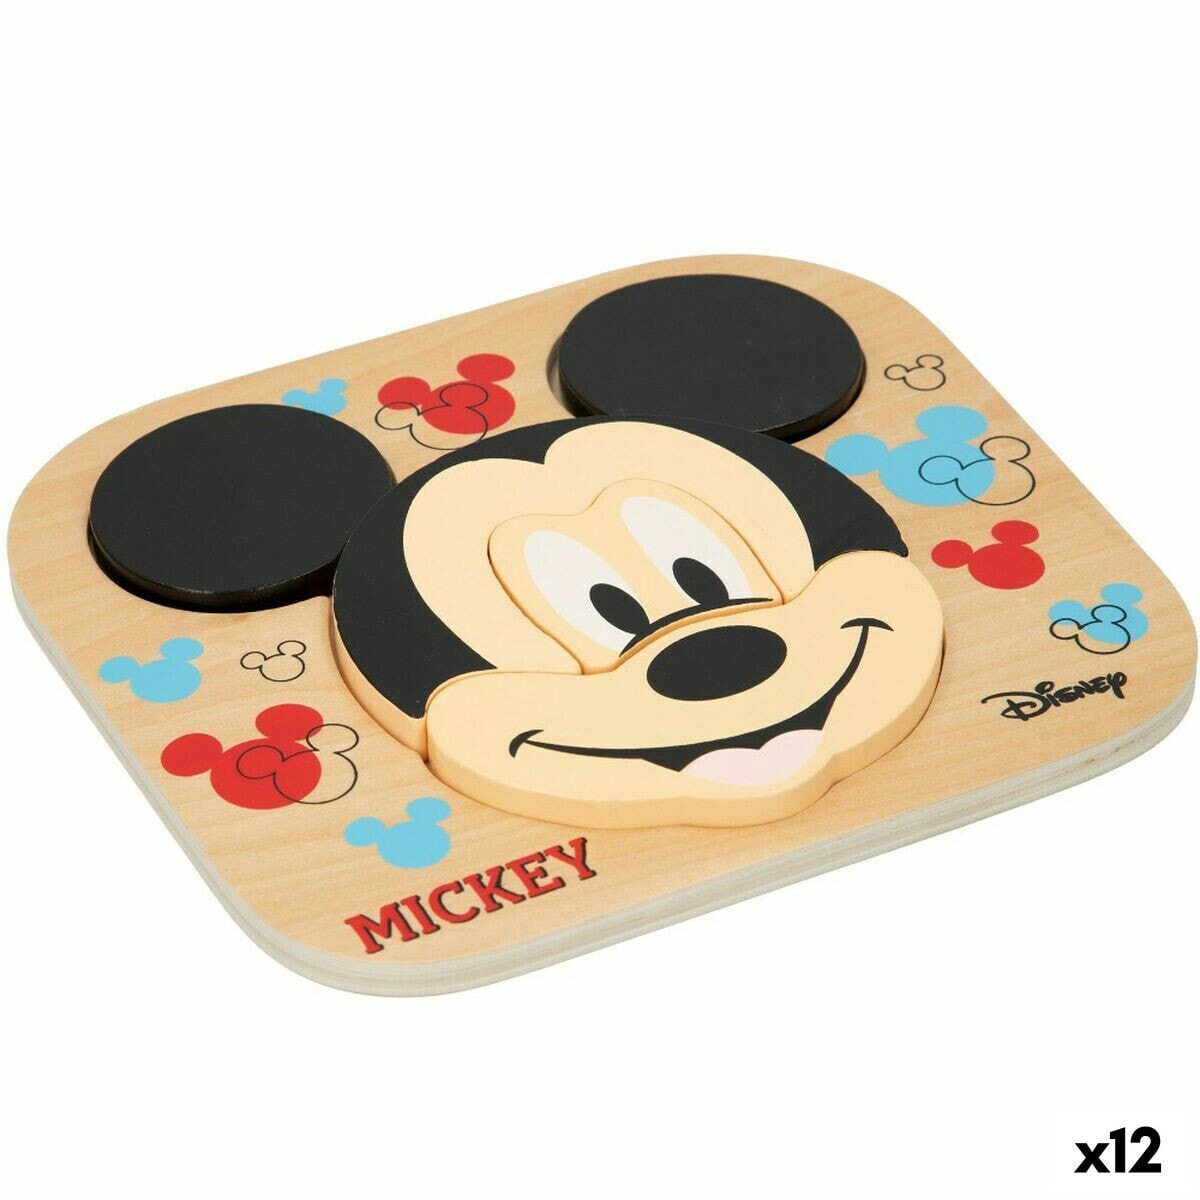 Child's Wooden Puzzle Disney Mickey Mouse + 12 Months 6 Pieces (12 Units)